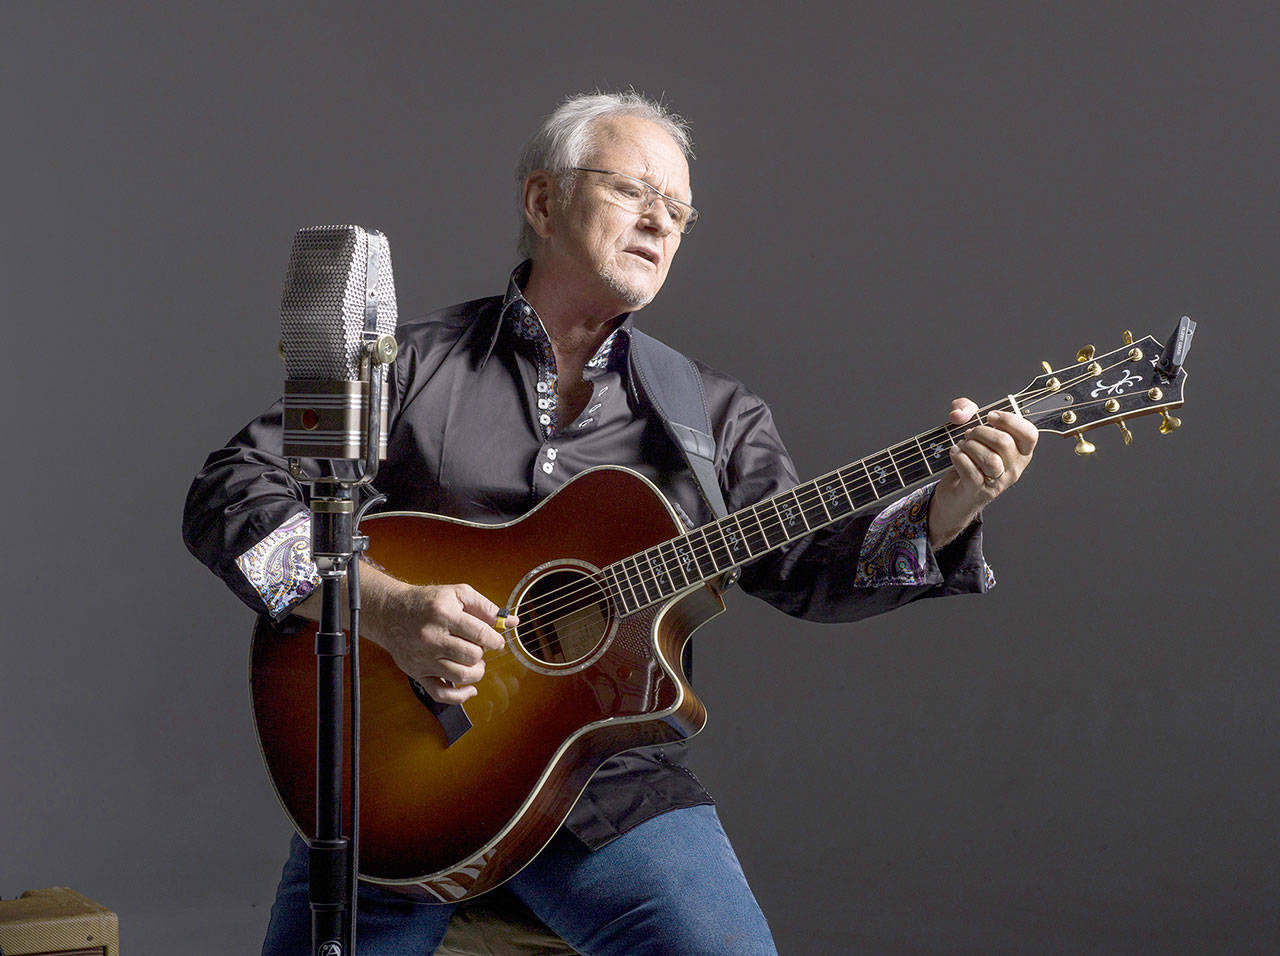 Jesse Colin Young will offer a solo set and a set with his eight-piece band at the Port Angeles High School Performing Arts Center this Saturday.